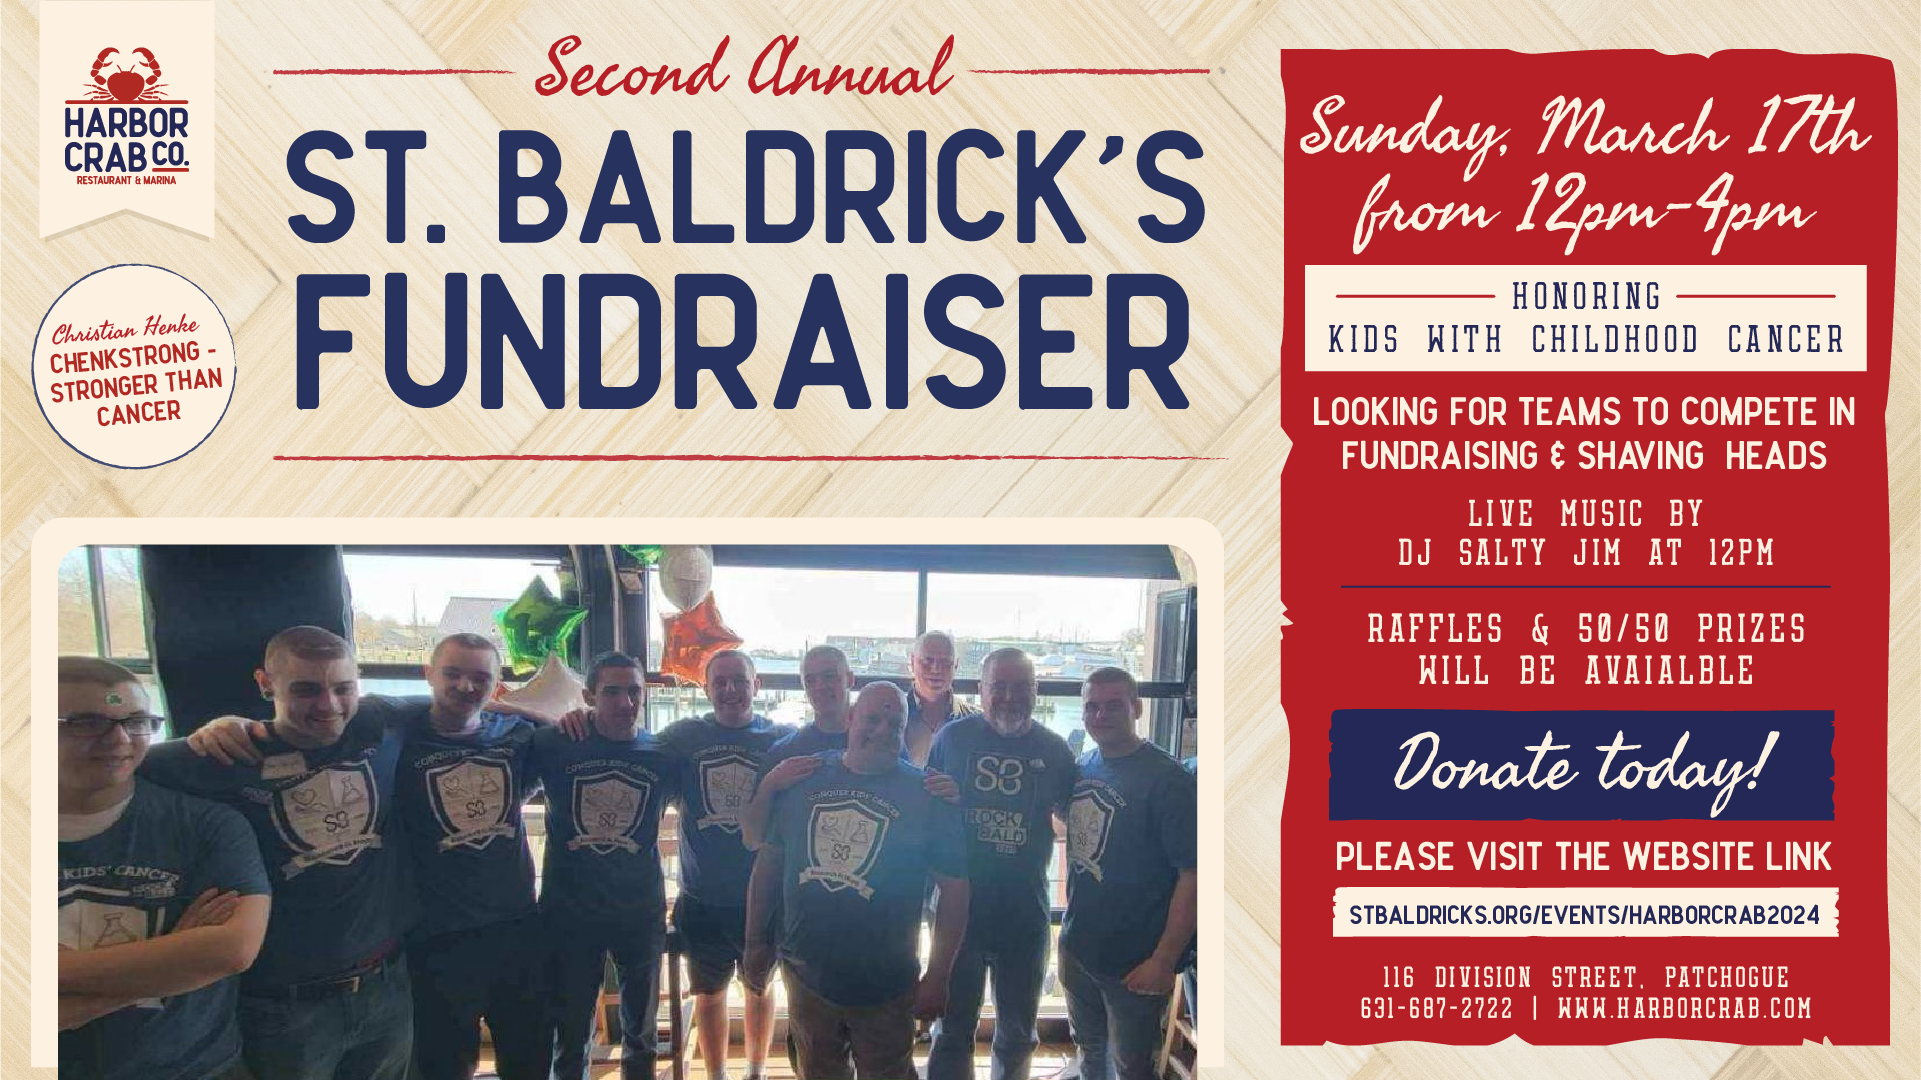  Harbor Crab Co.'s Second Annual St. Baldrick's Fundraiser event, featuring a group of smiling people with shaved heads, event details, and a call to donate for childhood cancer.